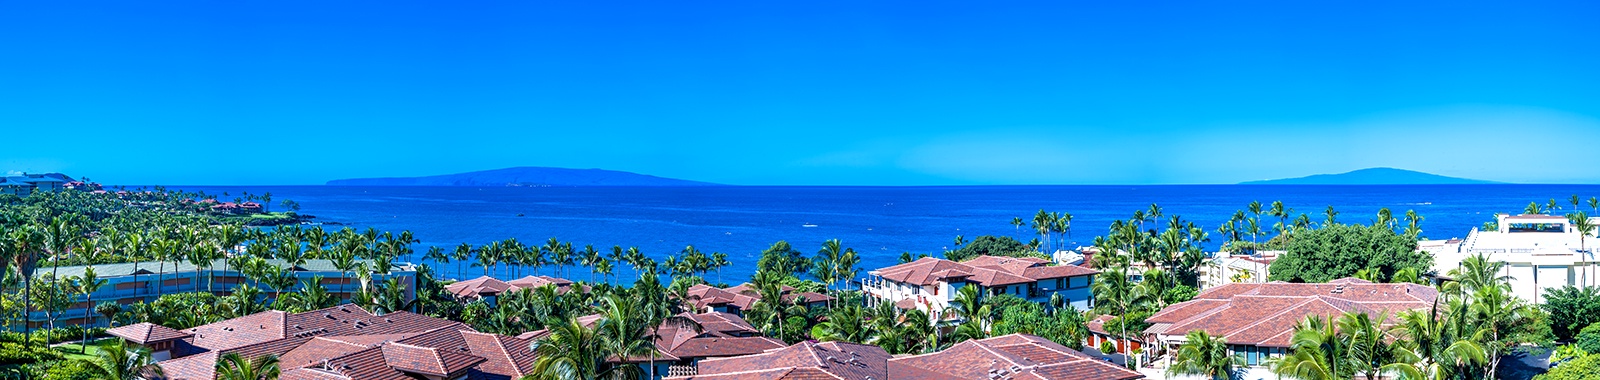 Wailea Vacation Rentals, Pacific Paradise Suite J505 at Wailea Beach Villas* - Enjoy Outdoor Dining with Stunning Views!